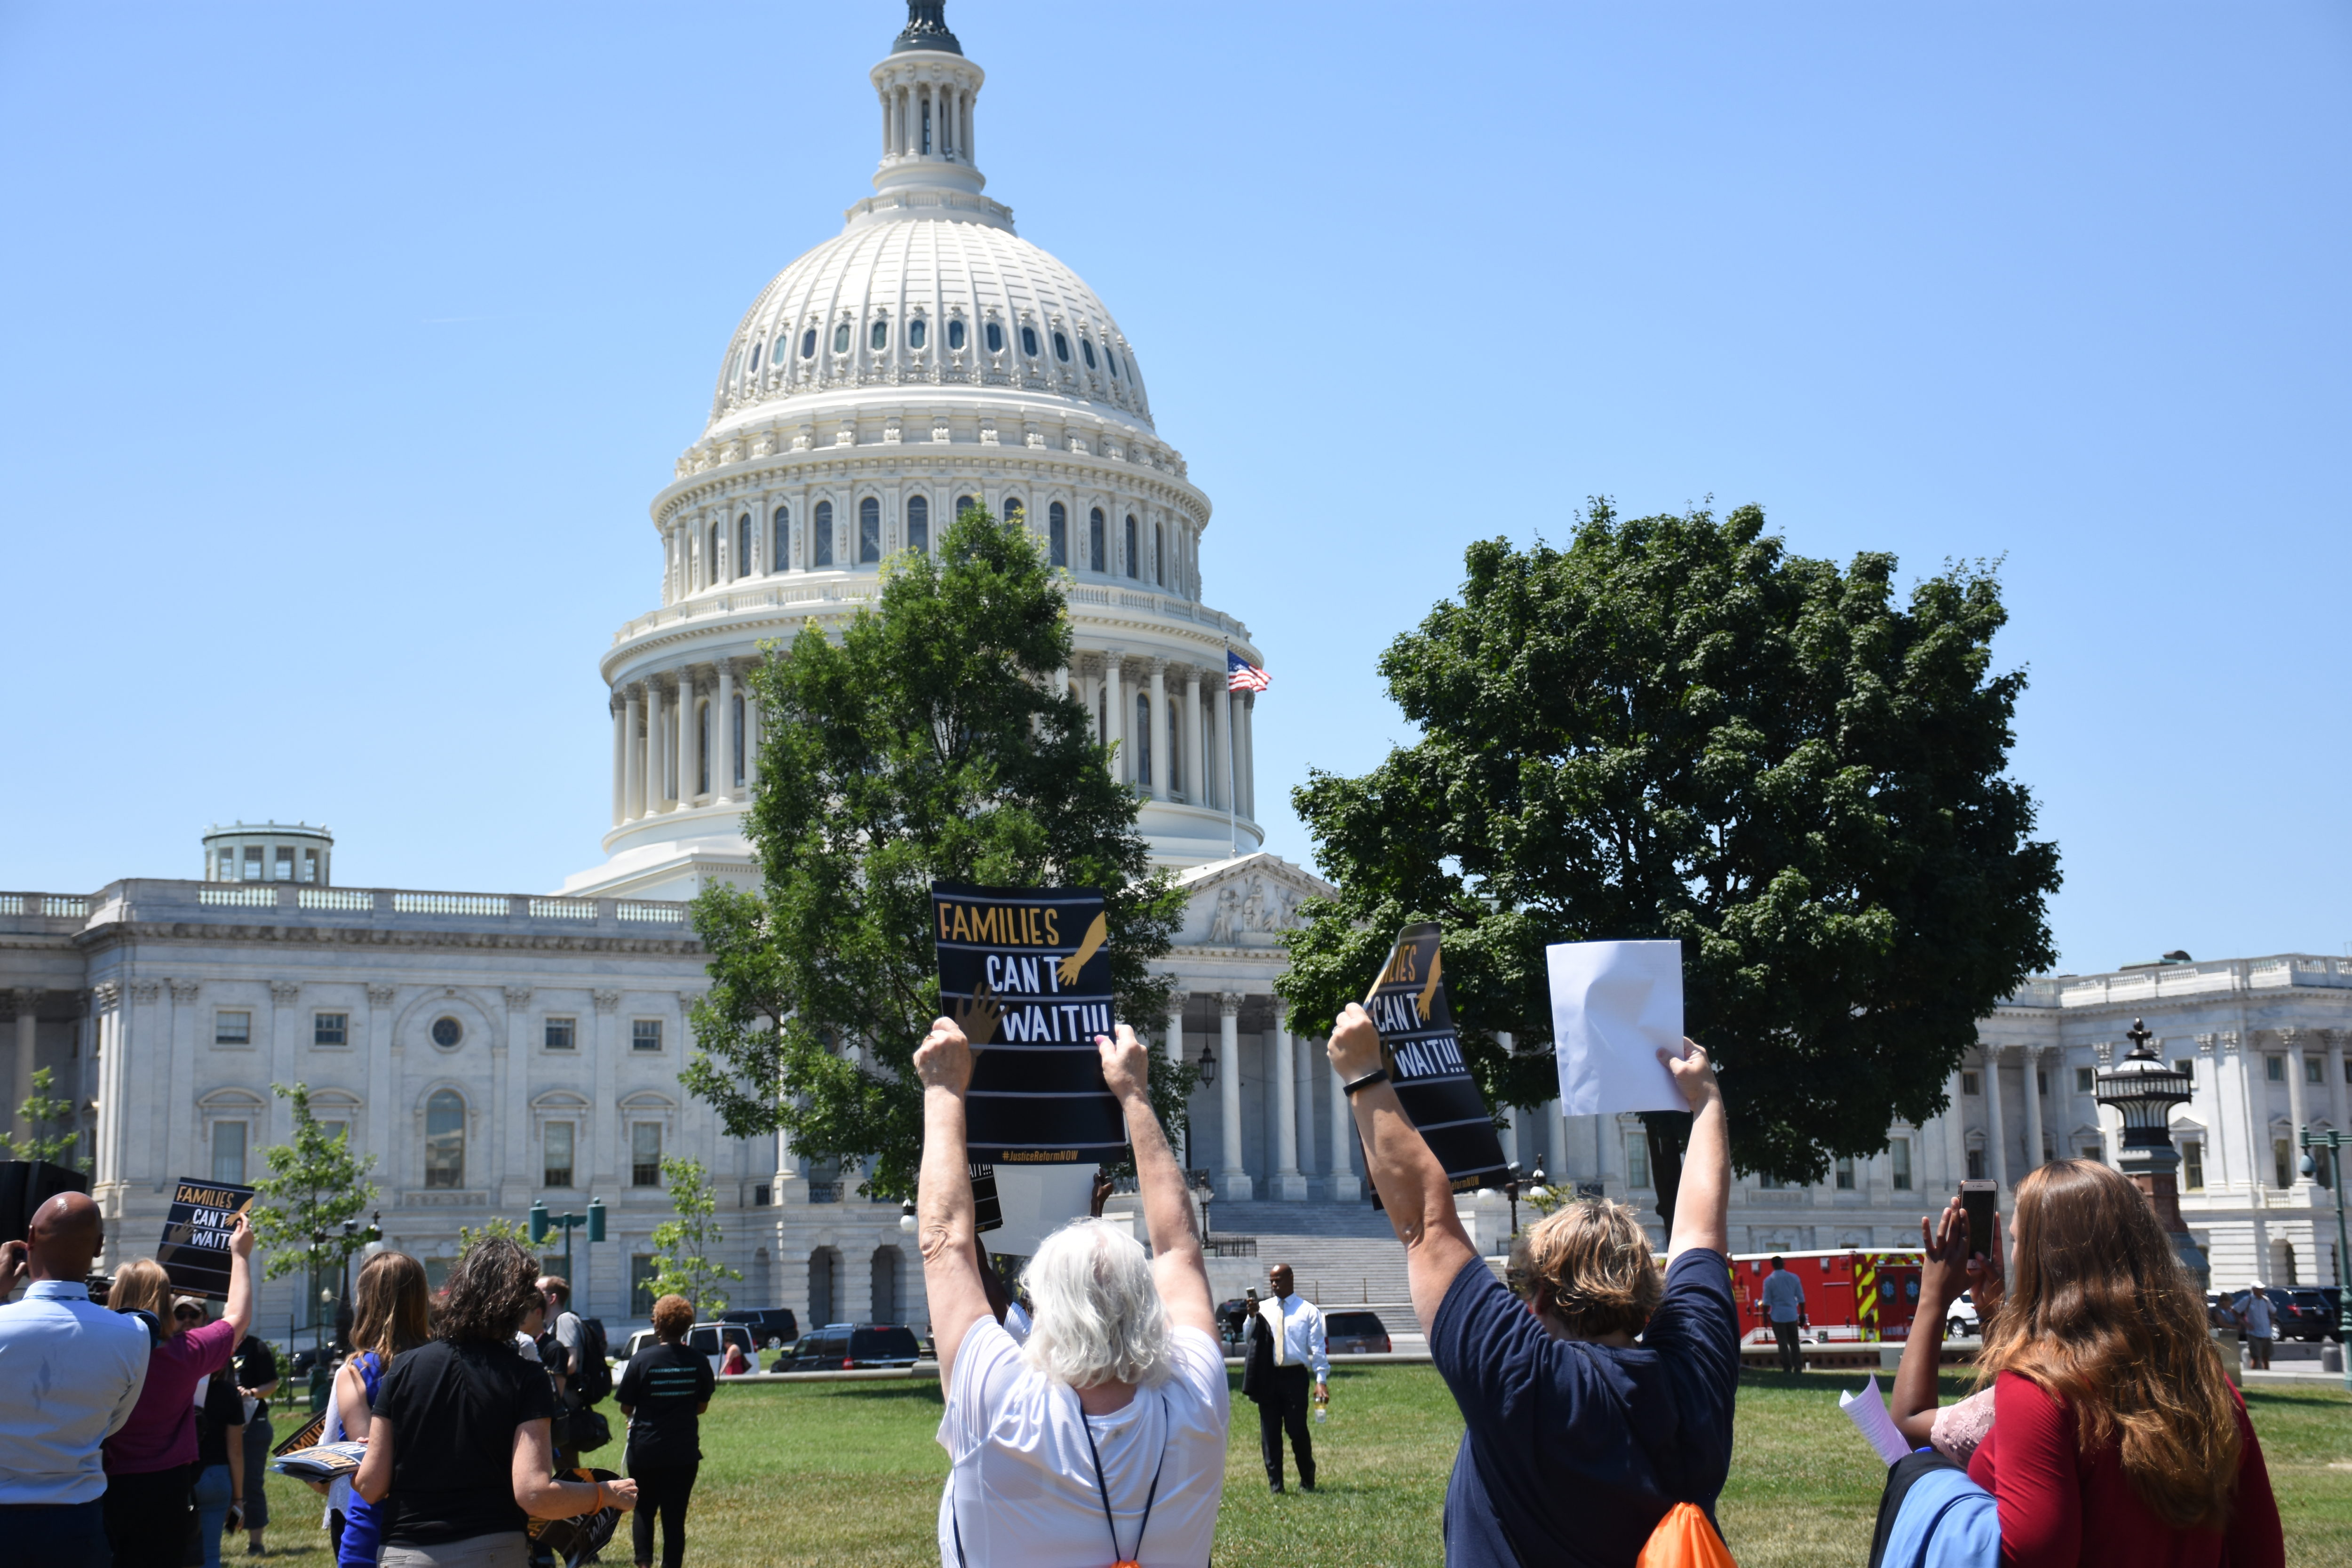 Justice reform advocates rallied for justice reform in Washington D.C.